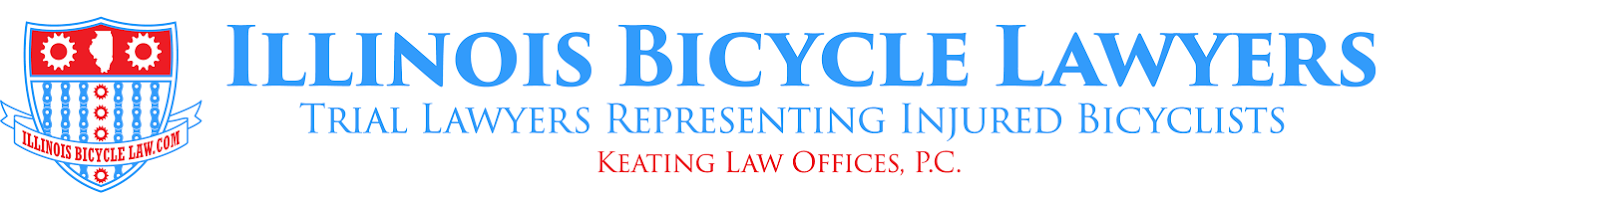 Chicago Bicycle Accident Lawyer | Keating Law Offices the Illinois Bicycle Lawyers